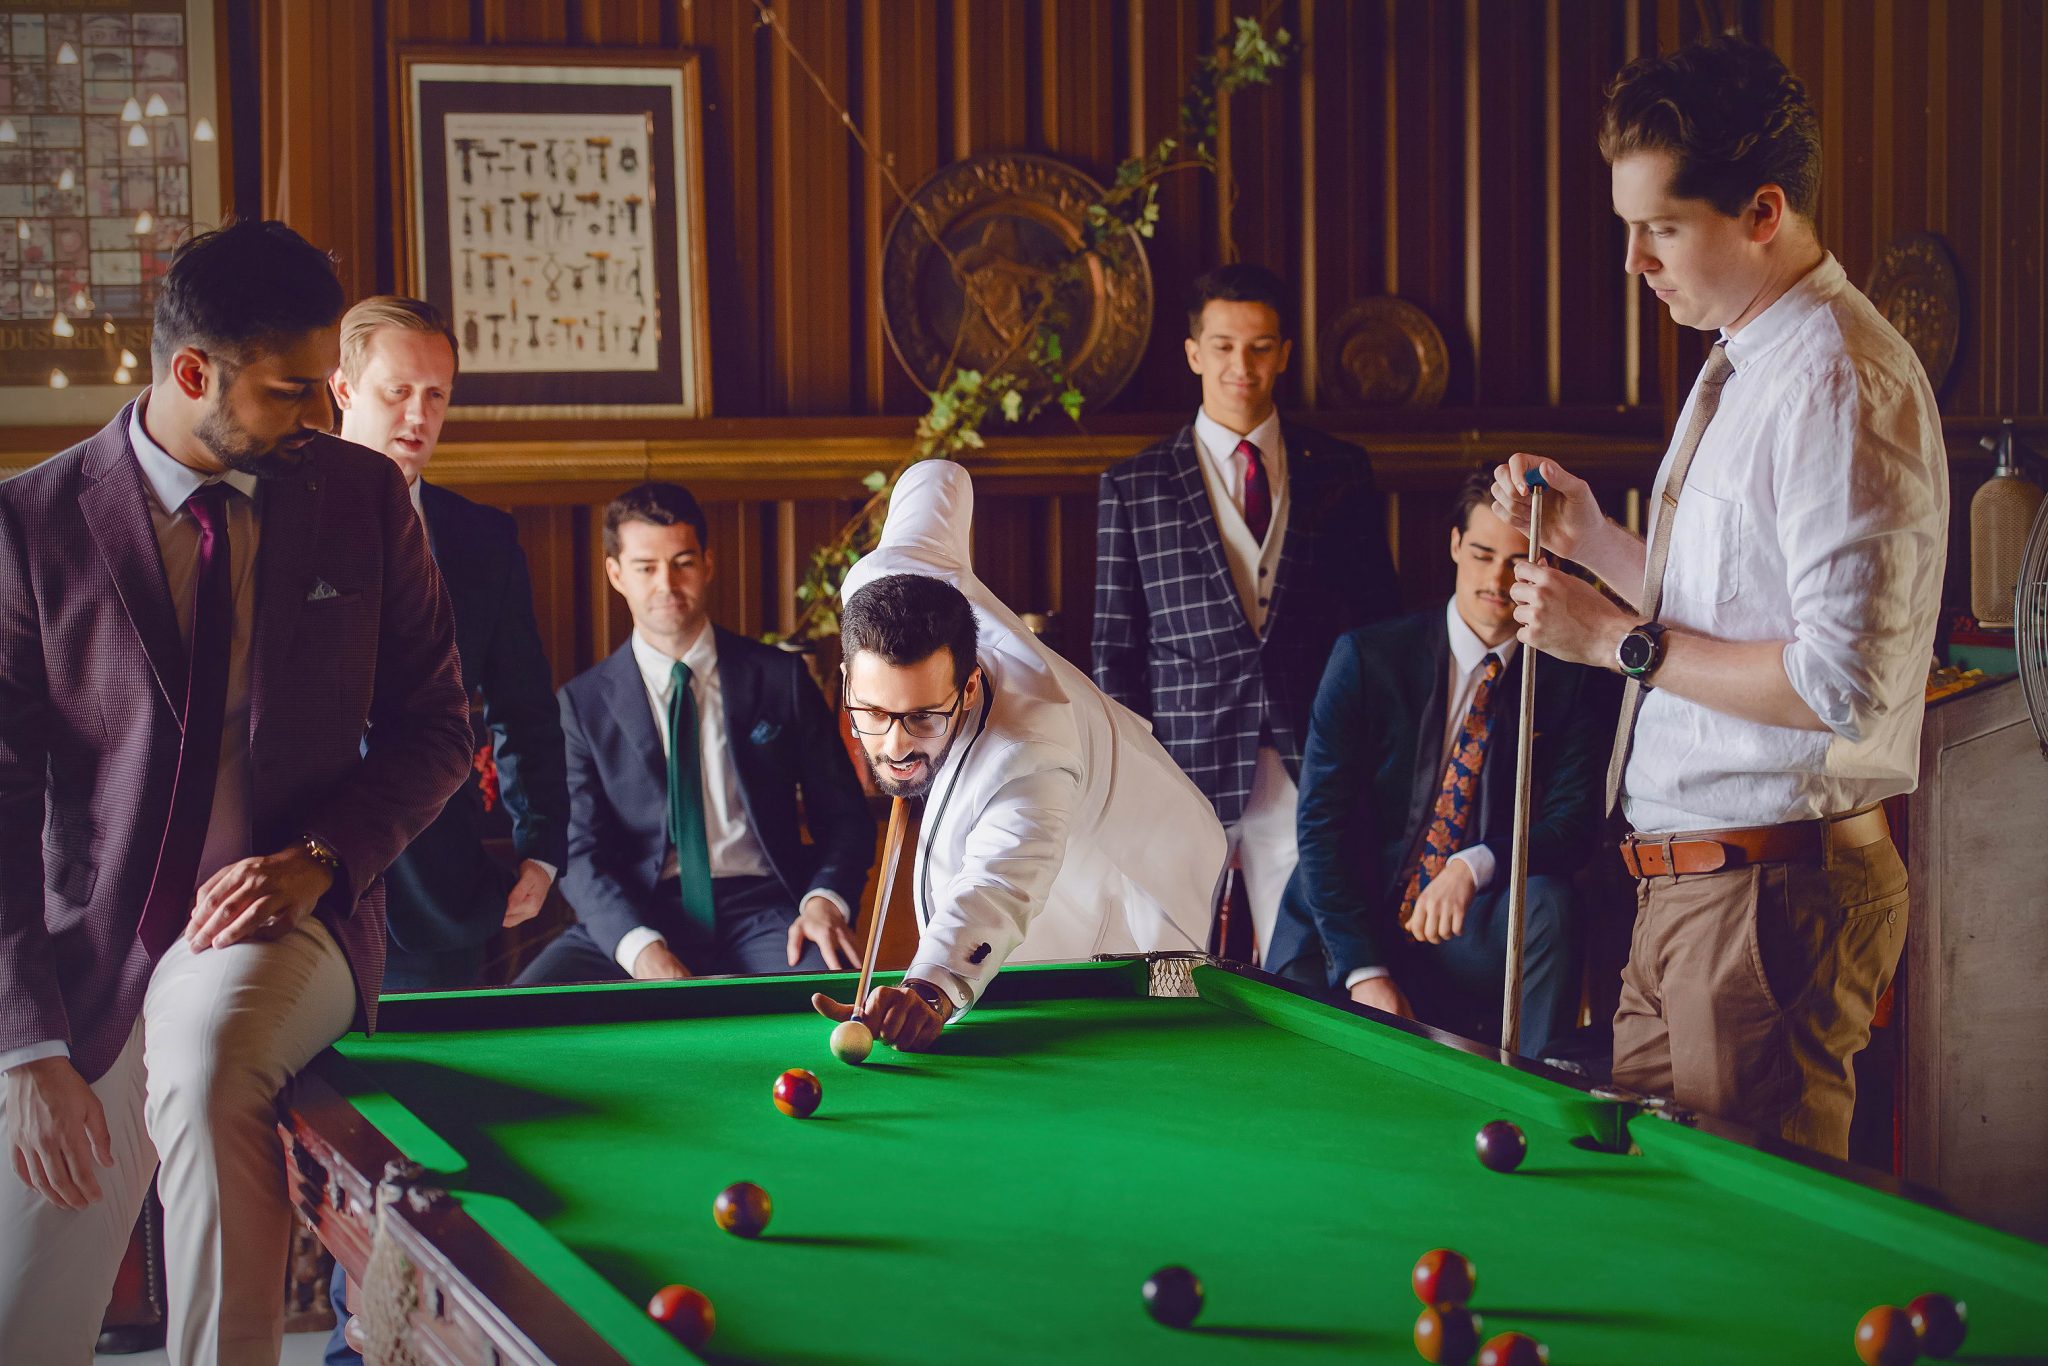 The boys are playing billiard with their suits